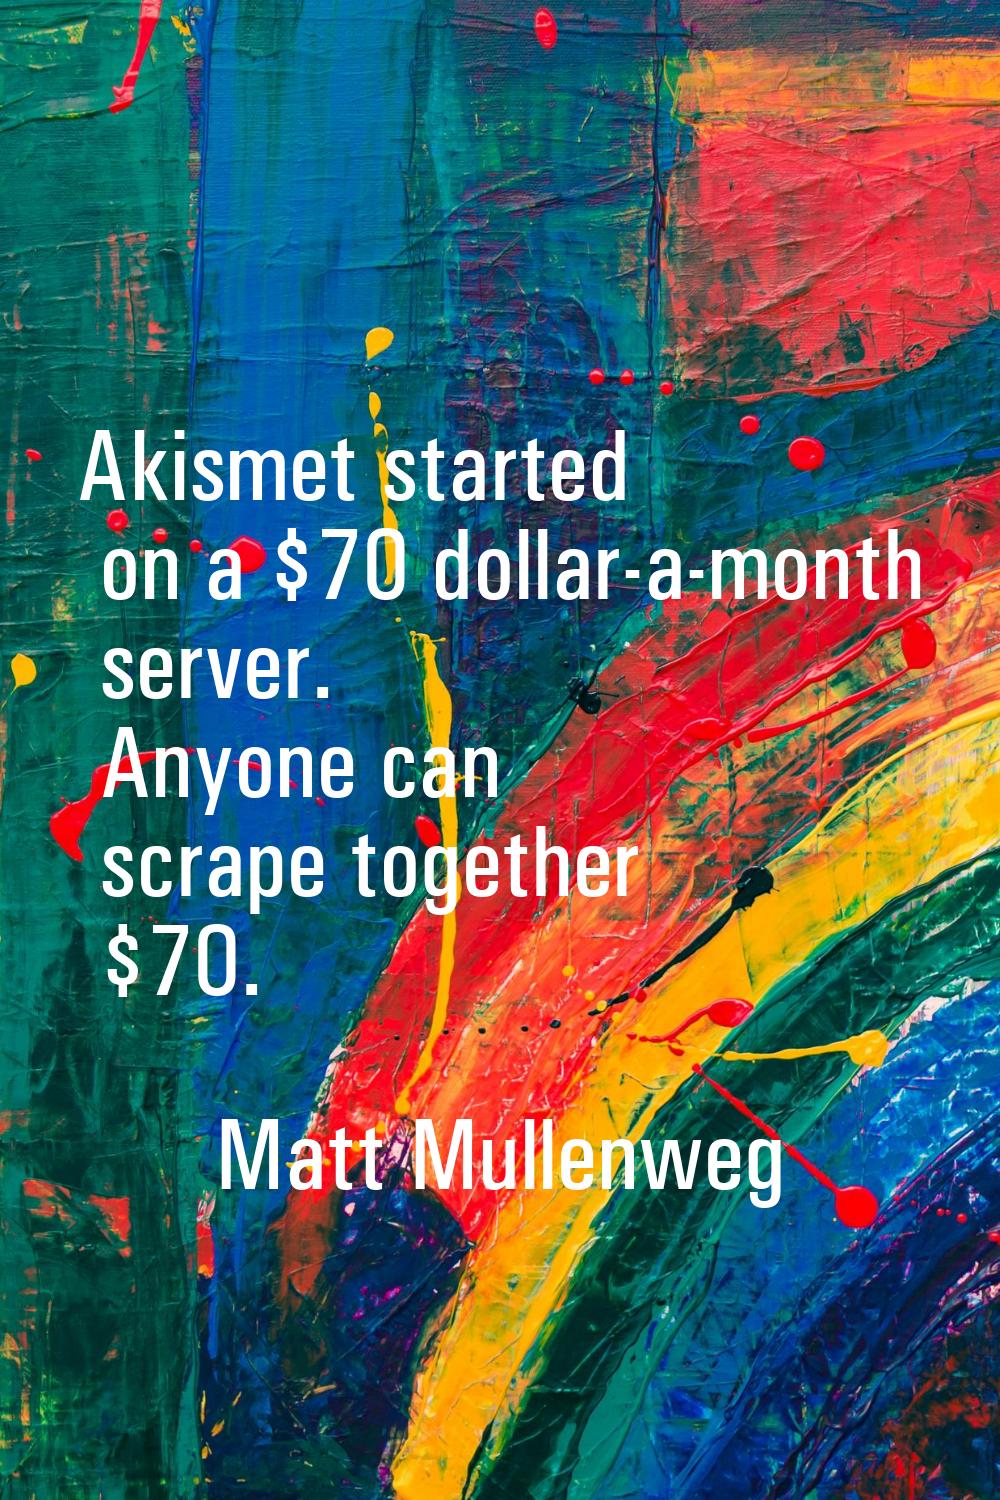 Akismet started on a $70 dollar-a-month server. Anyone can scrape together $70.